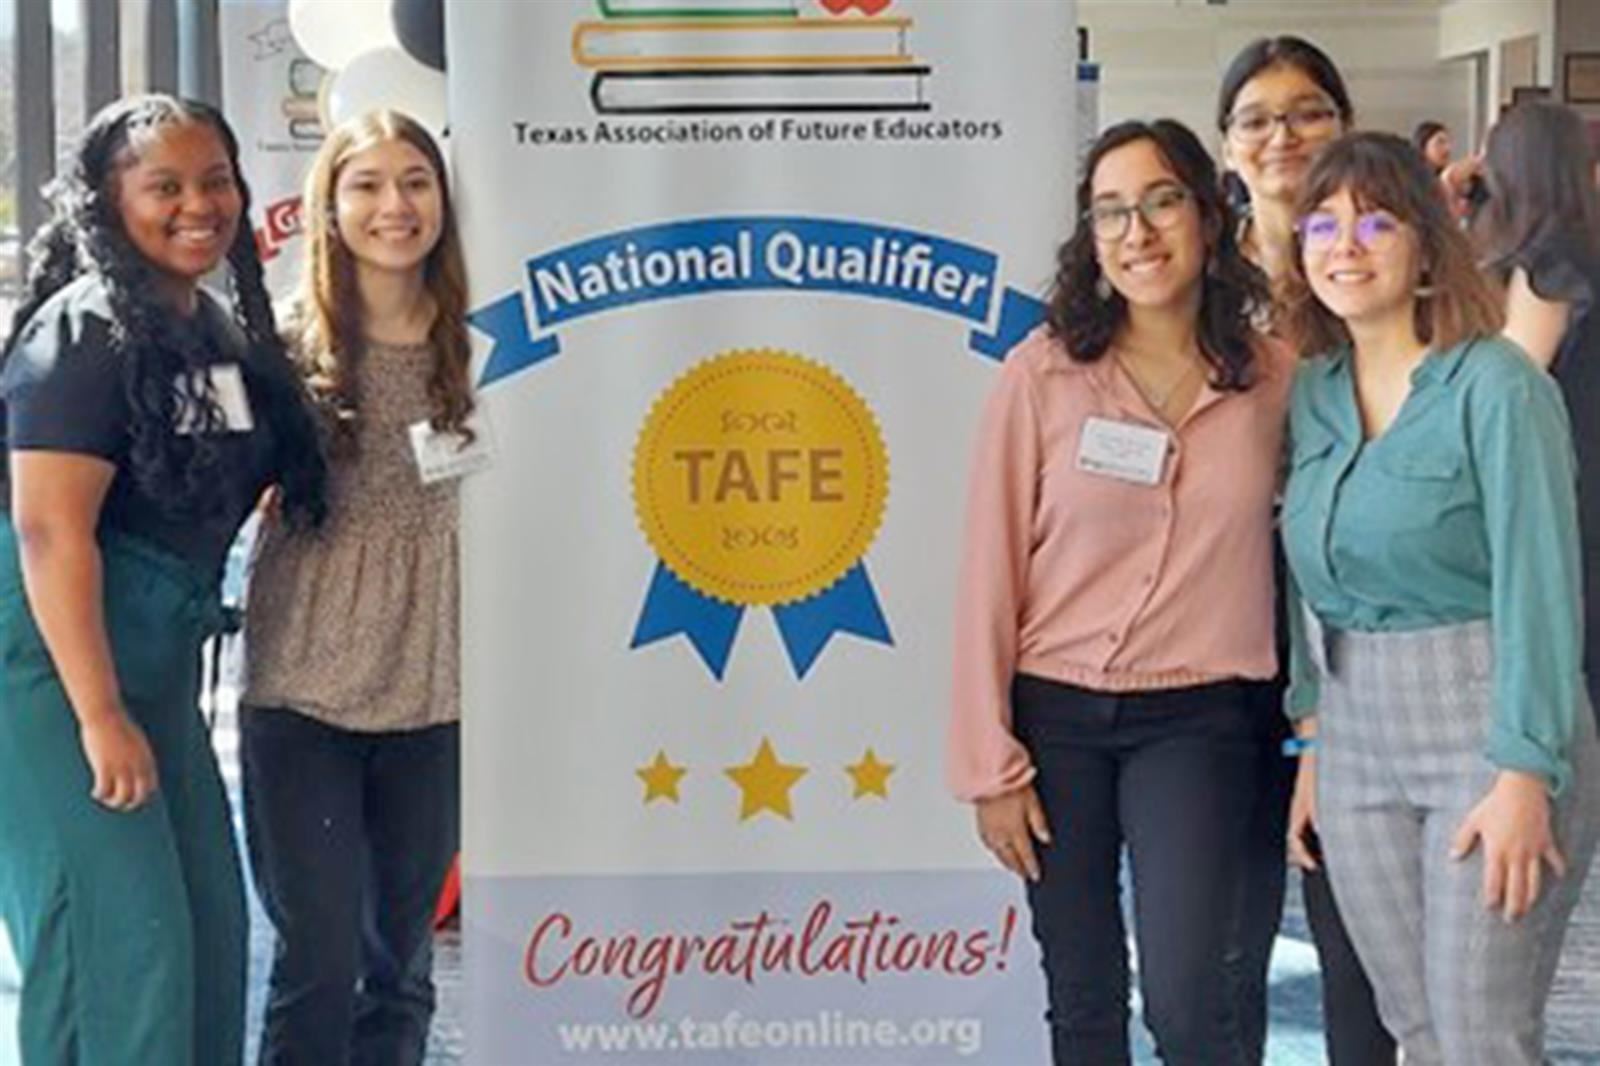 Jersey Village students were national qualifiers during competition at the Texas Association of Future Educators summit.